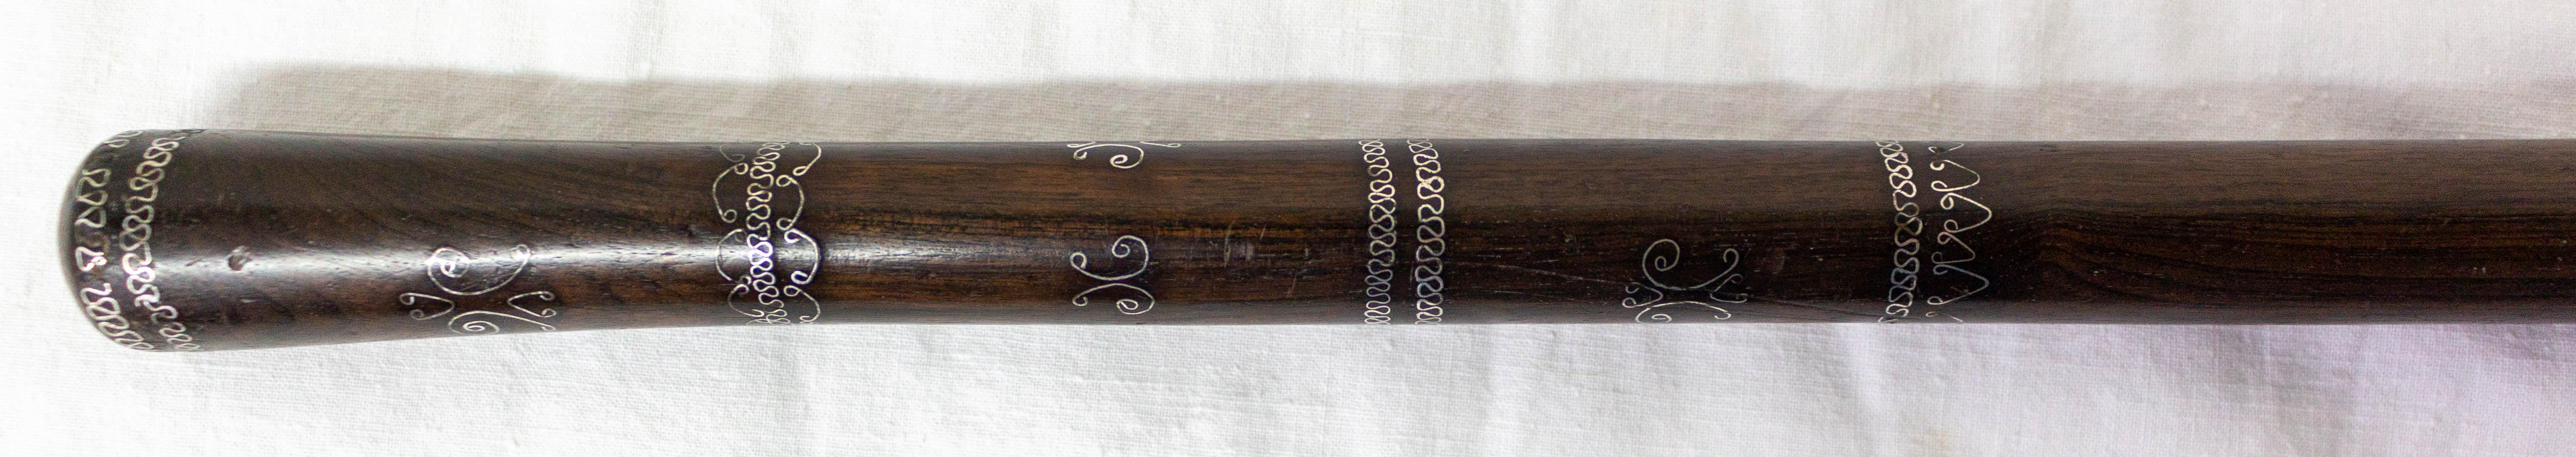 French walking stick or cane, circa 1900
Mahogany and silver

Shipping:
2/2/87 cm 0.2 kg.